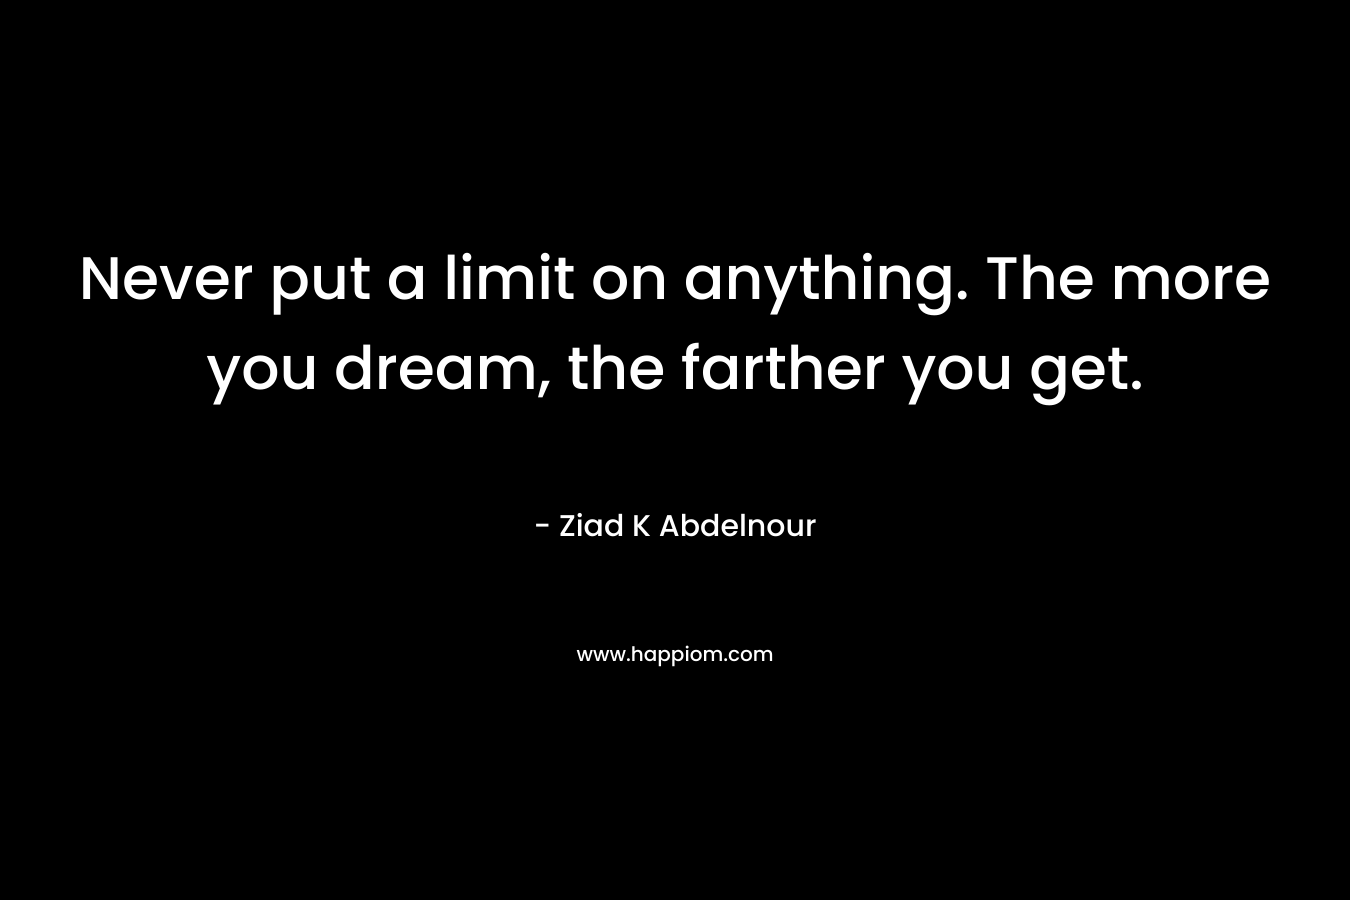 Never put a limit on anything. The more you dream, the farther you get.